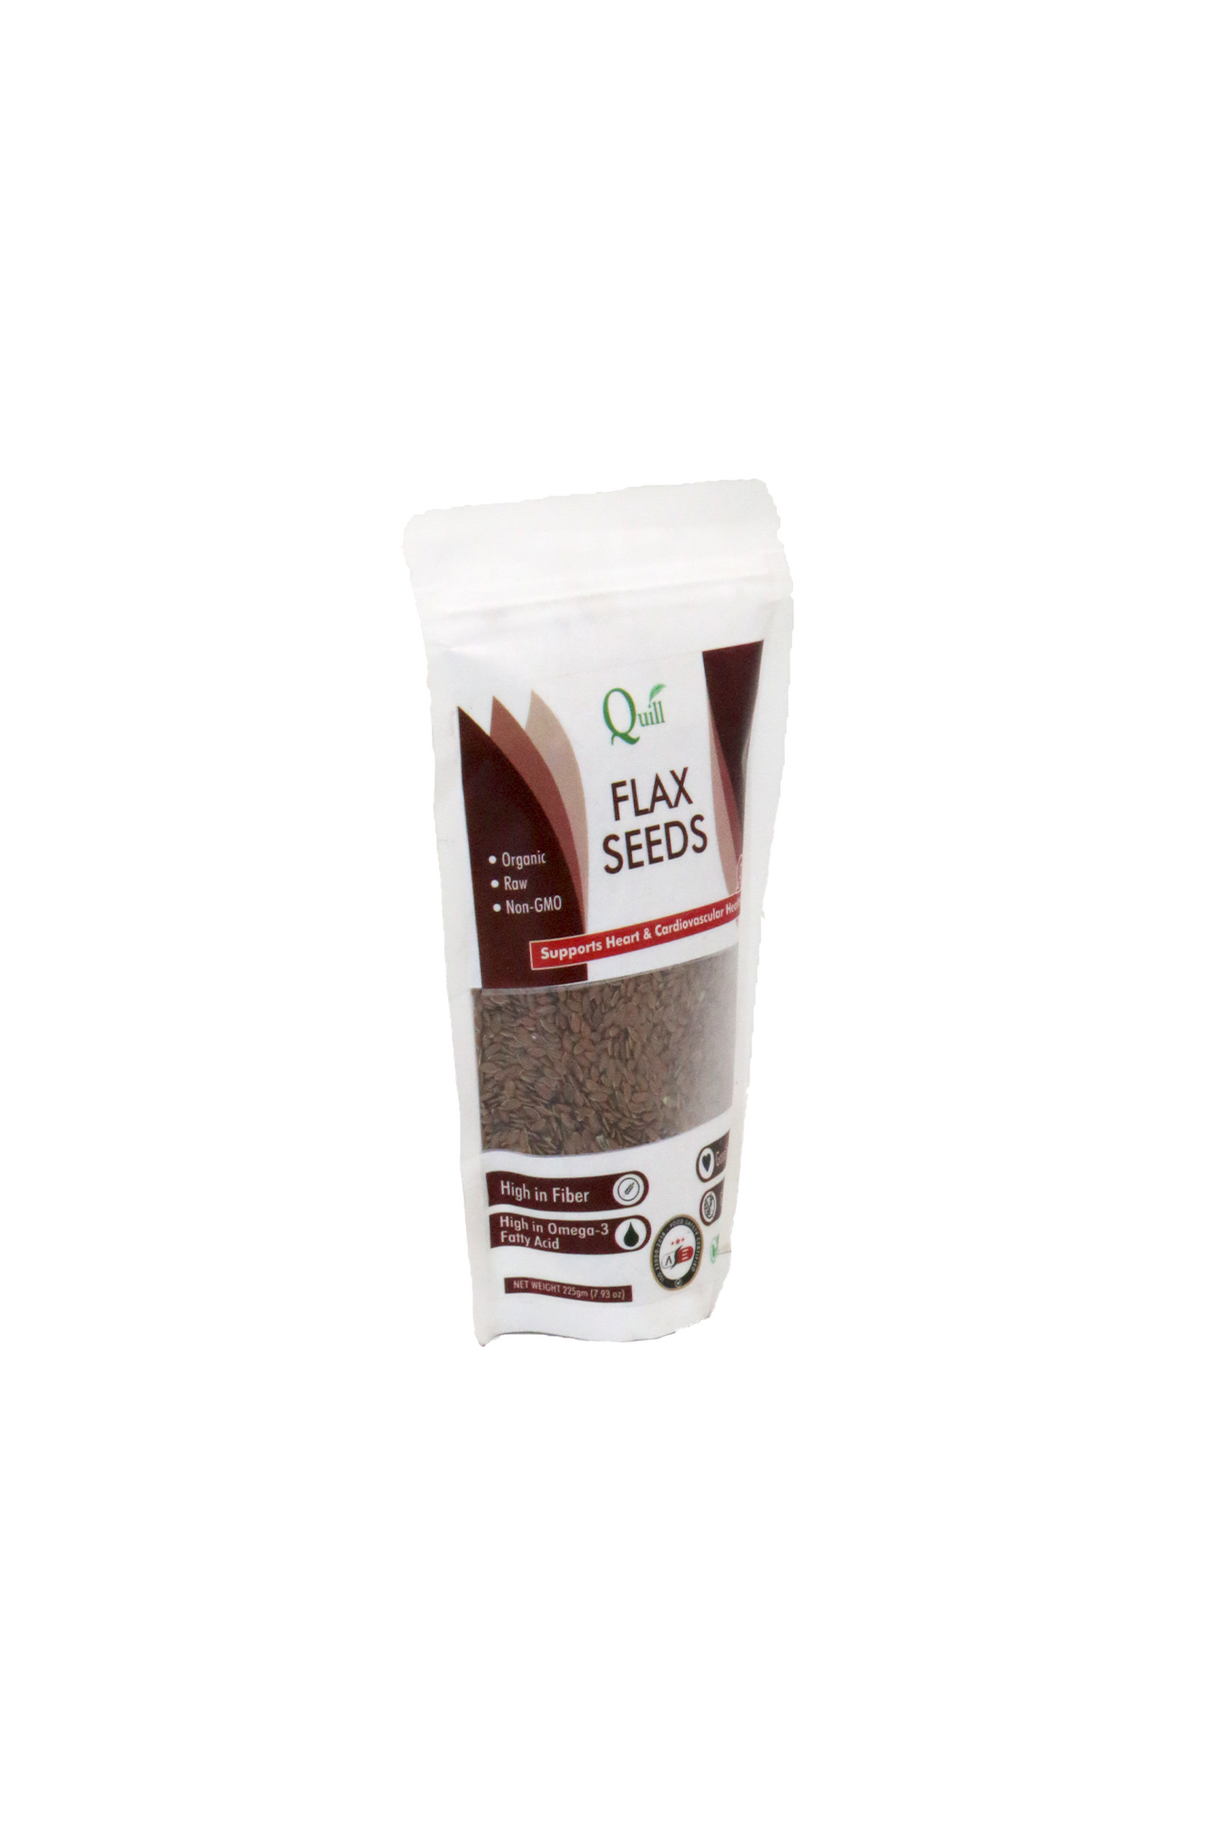 quill flax seeds 225g